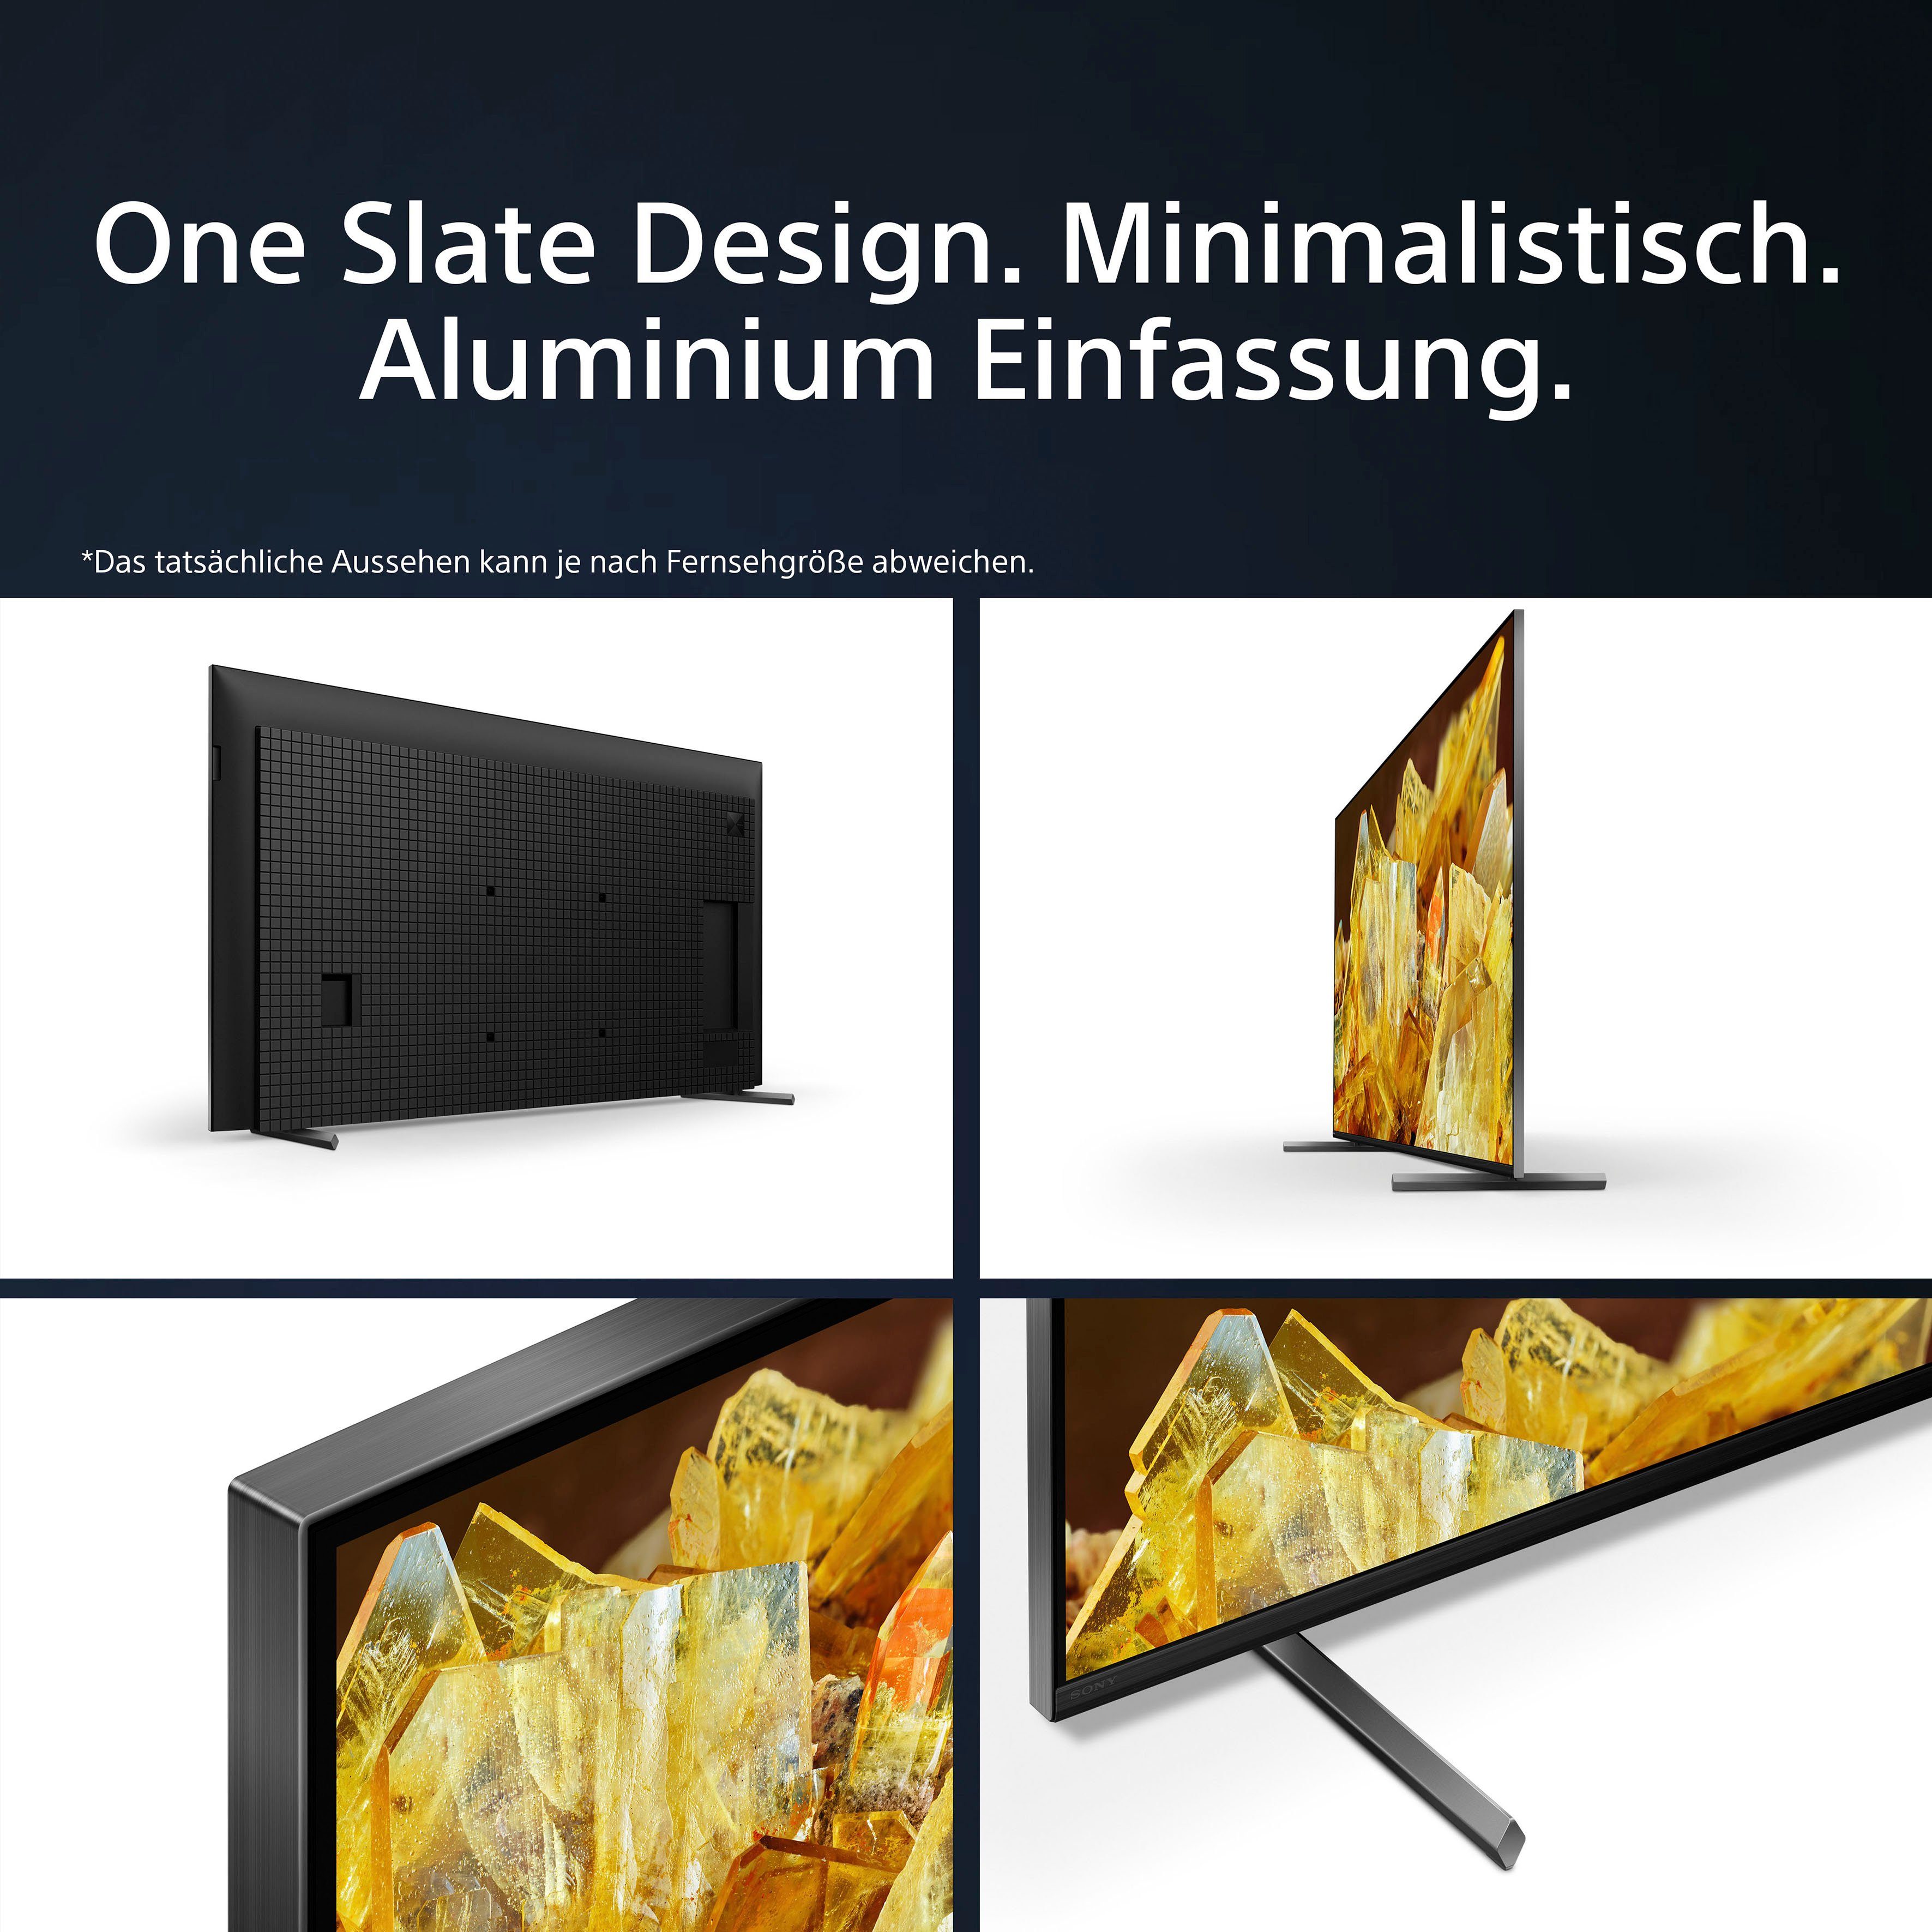 mit exklusiven XR-55X90L cm/55 Zoll, TRILUMINOS (139 PRO, HD, BRAVIA 4K TV, PS5-Features) Smart-TV, Ultra Google Android TV, Sony LED-Fernseher CORE,